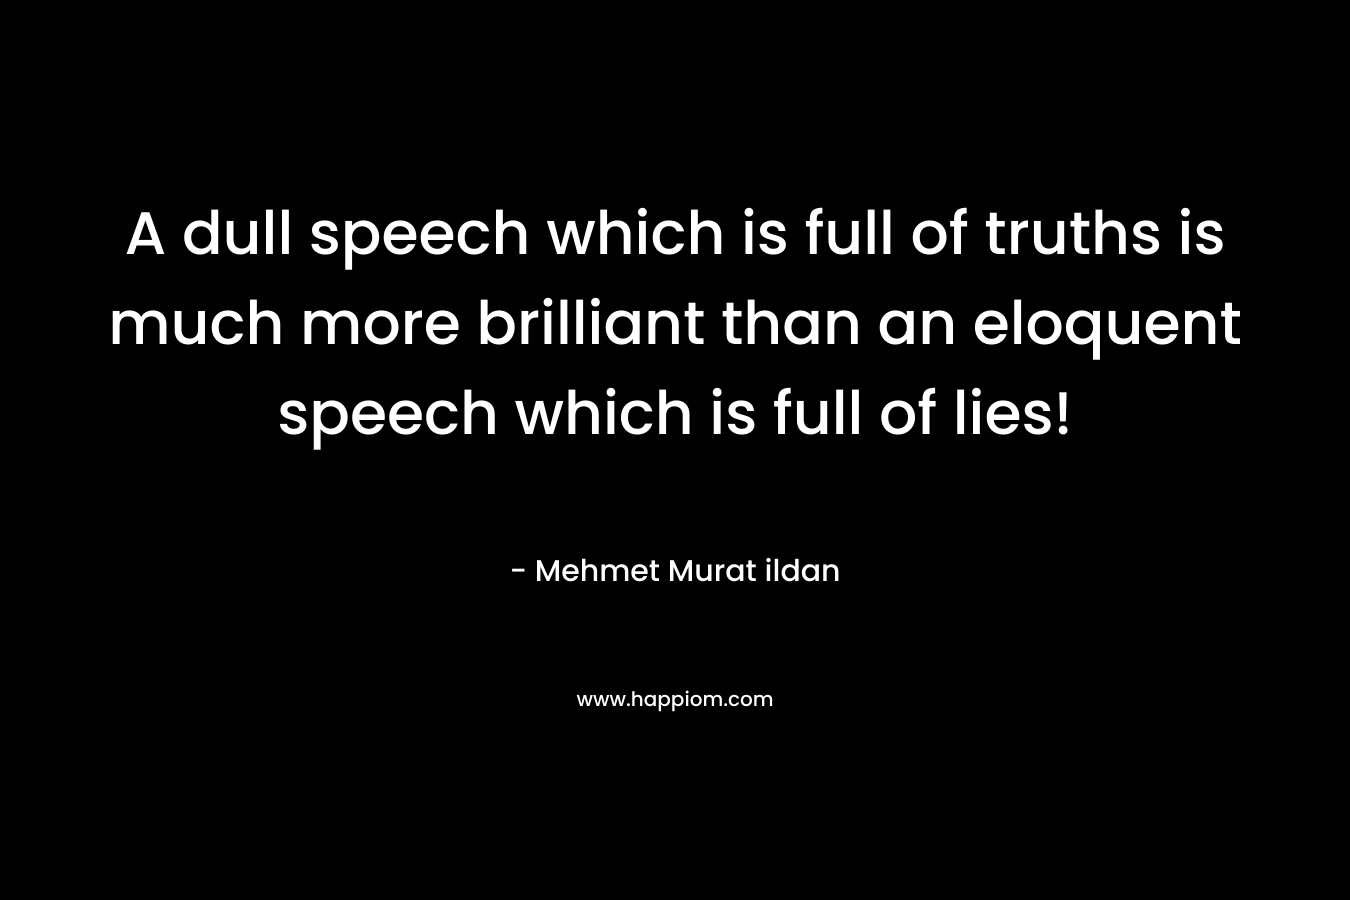 A dull speech which is full of truths is much more brilliant than an eloquent speech which is full of lies!